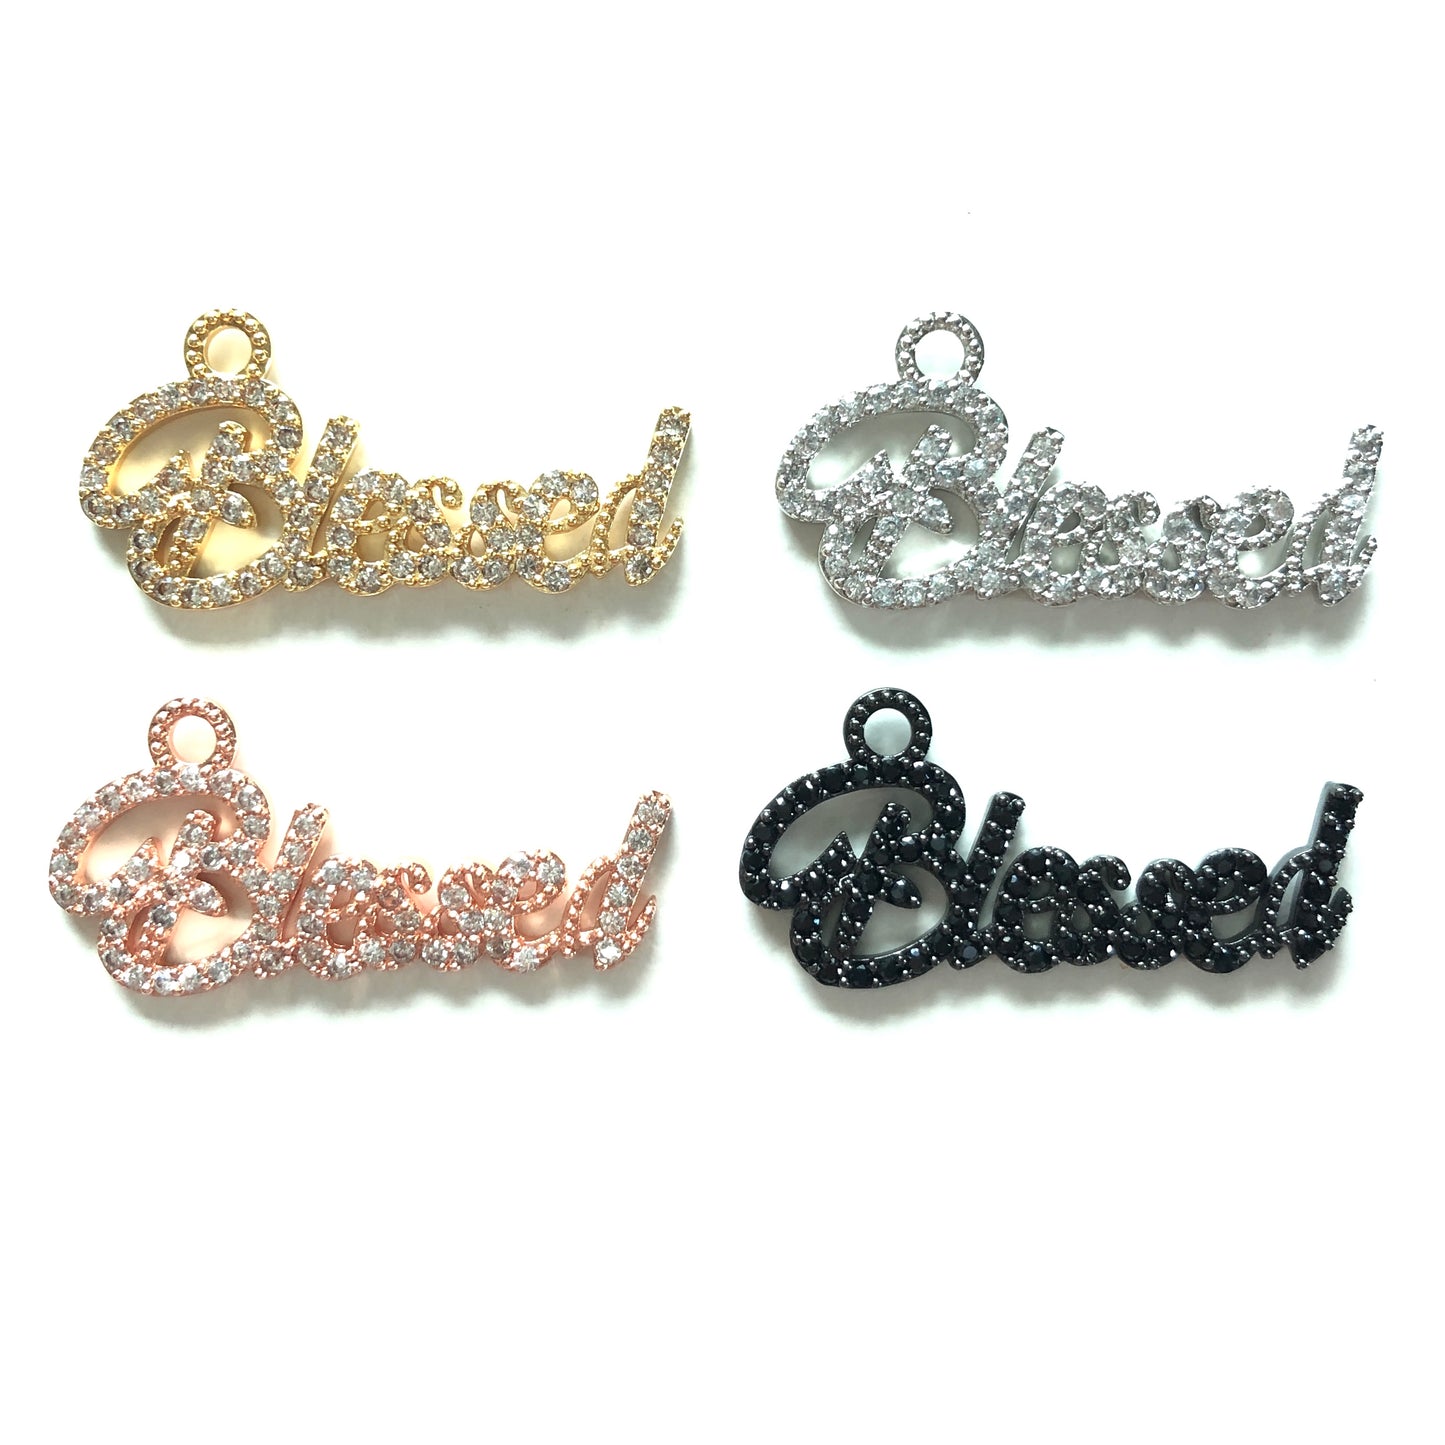 10pcs/lot 35.5*17.3mm CZ Paved Blessed Charms CZ Paved Charms Christian Quotes Words & Quotes Charms Beads Beyond